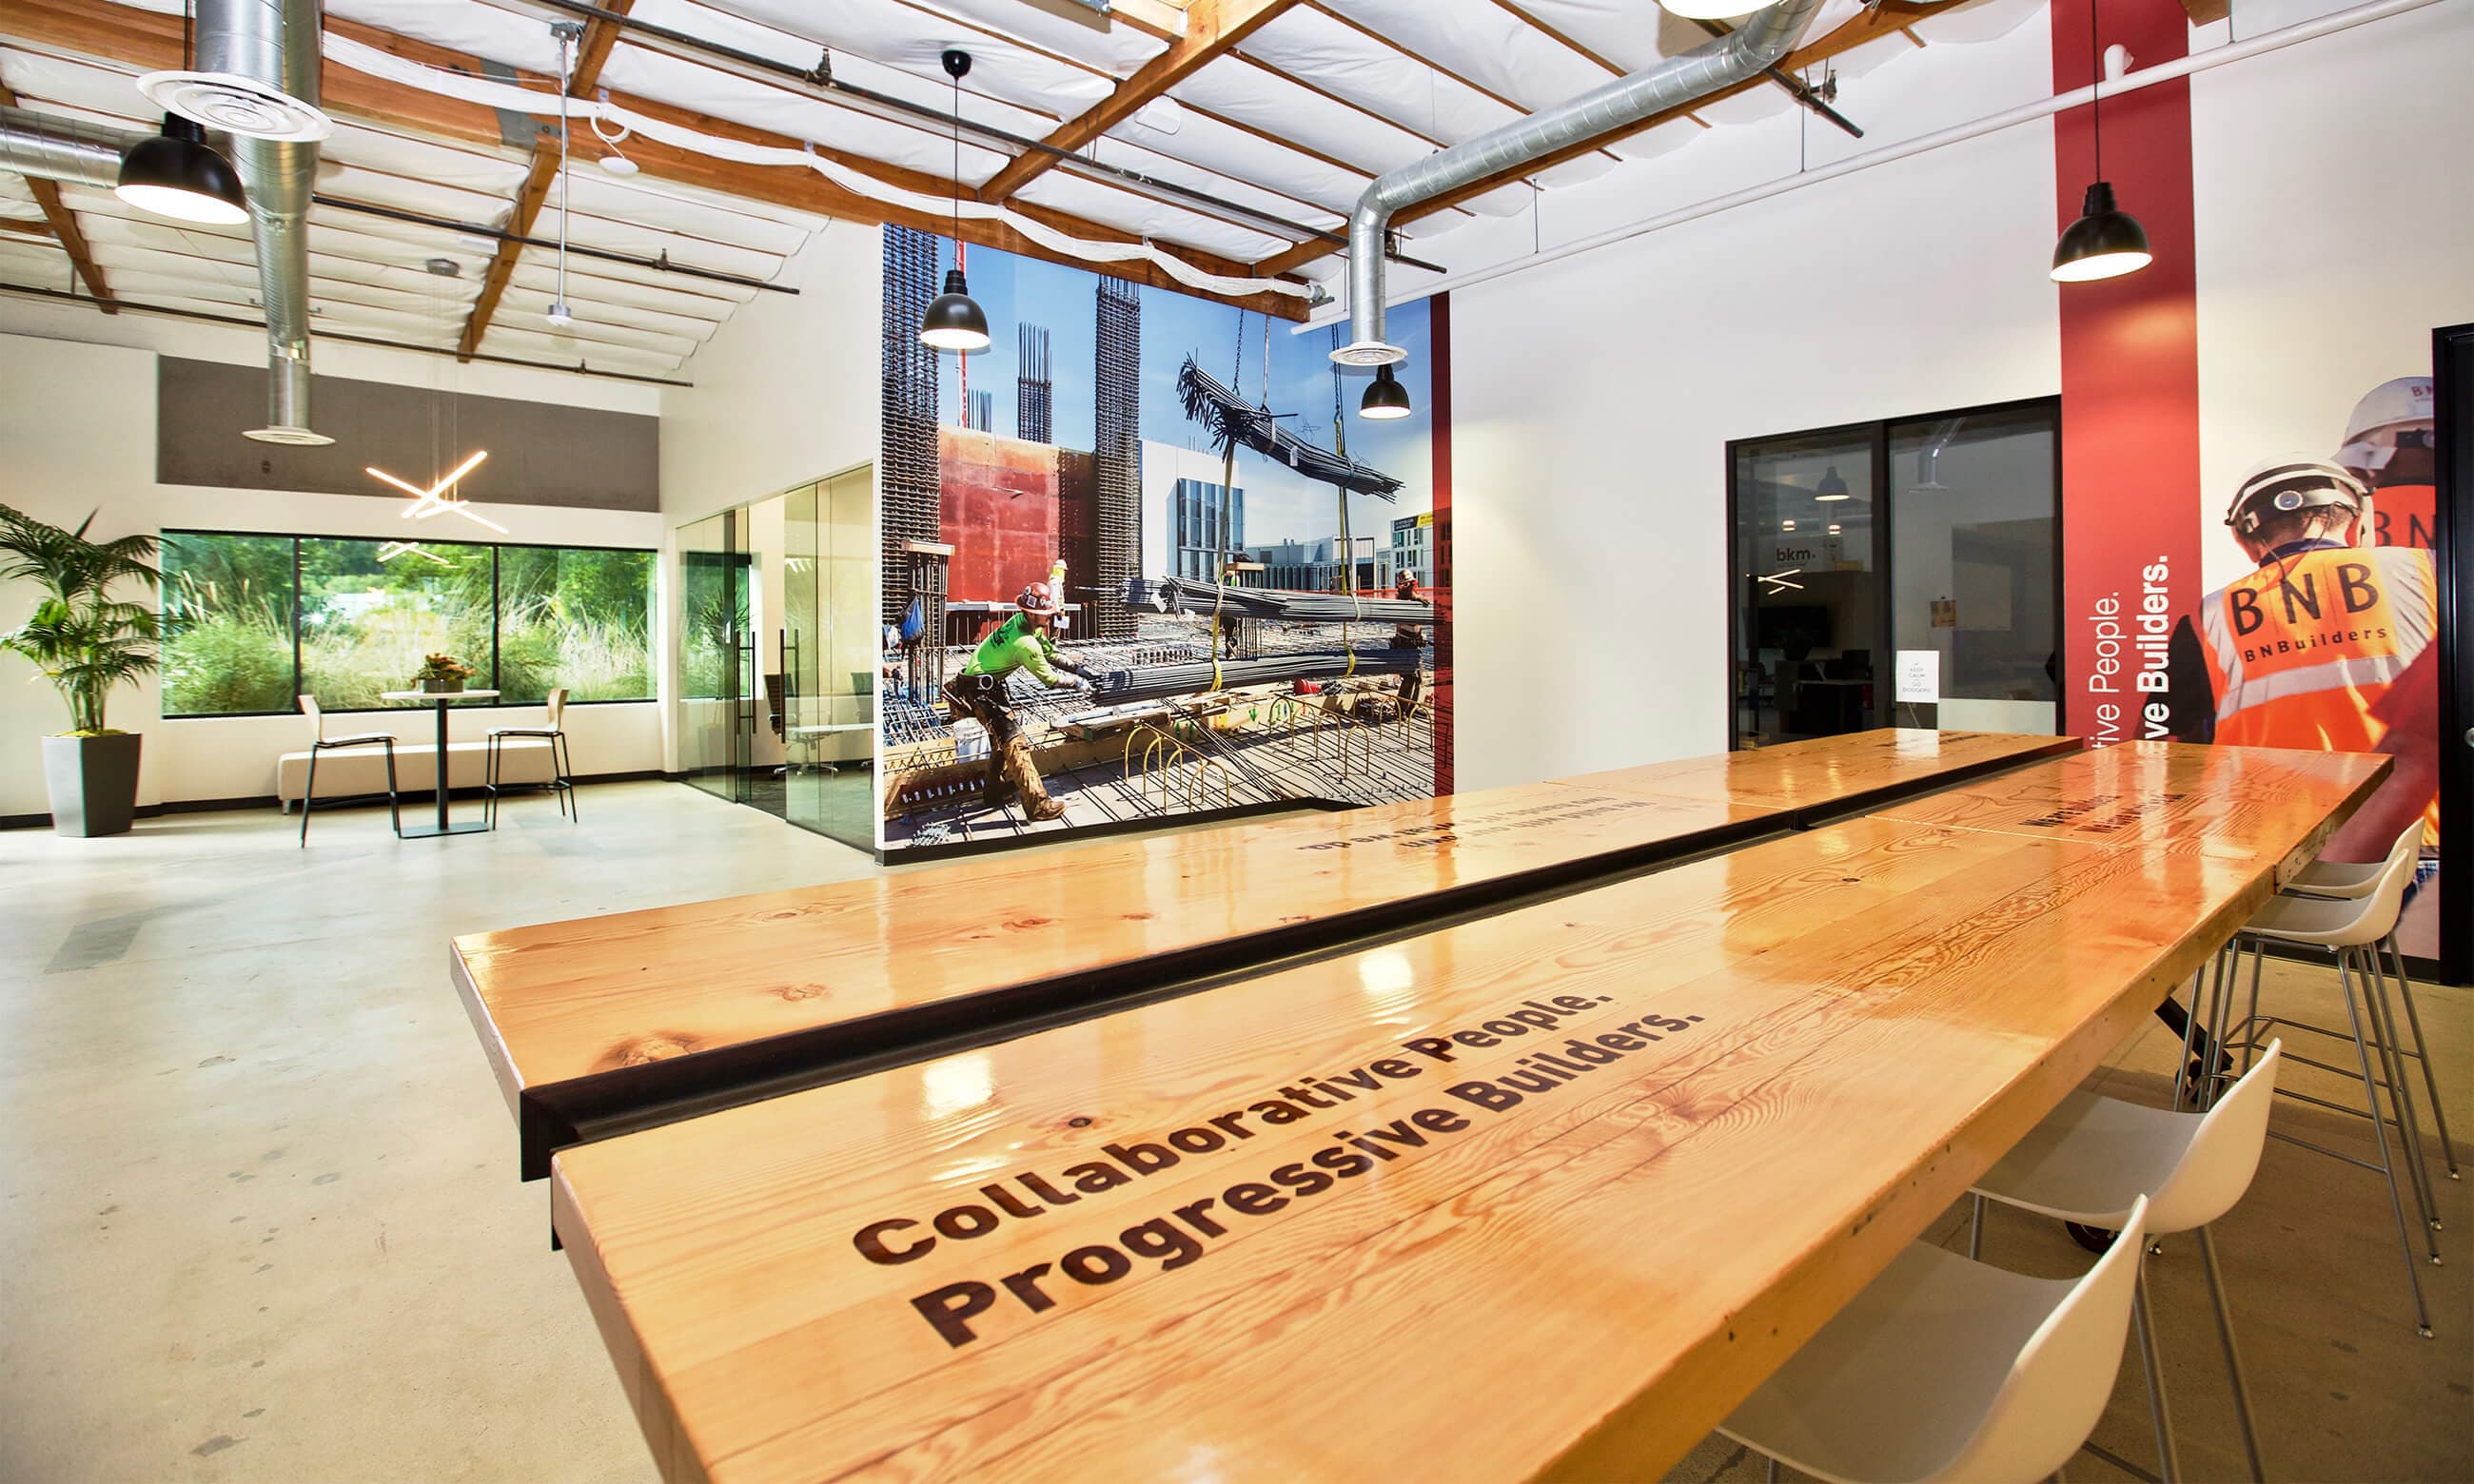 Meeting table engraved with the slogan "Collaborative People. Progressive Builders."